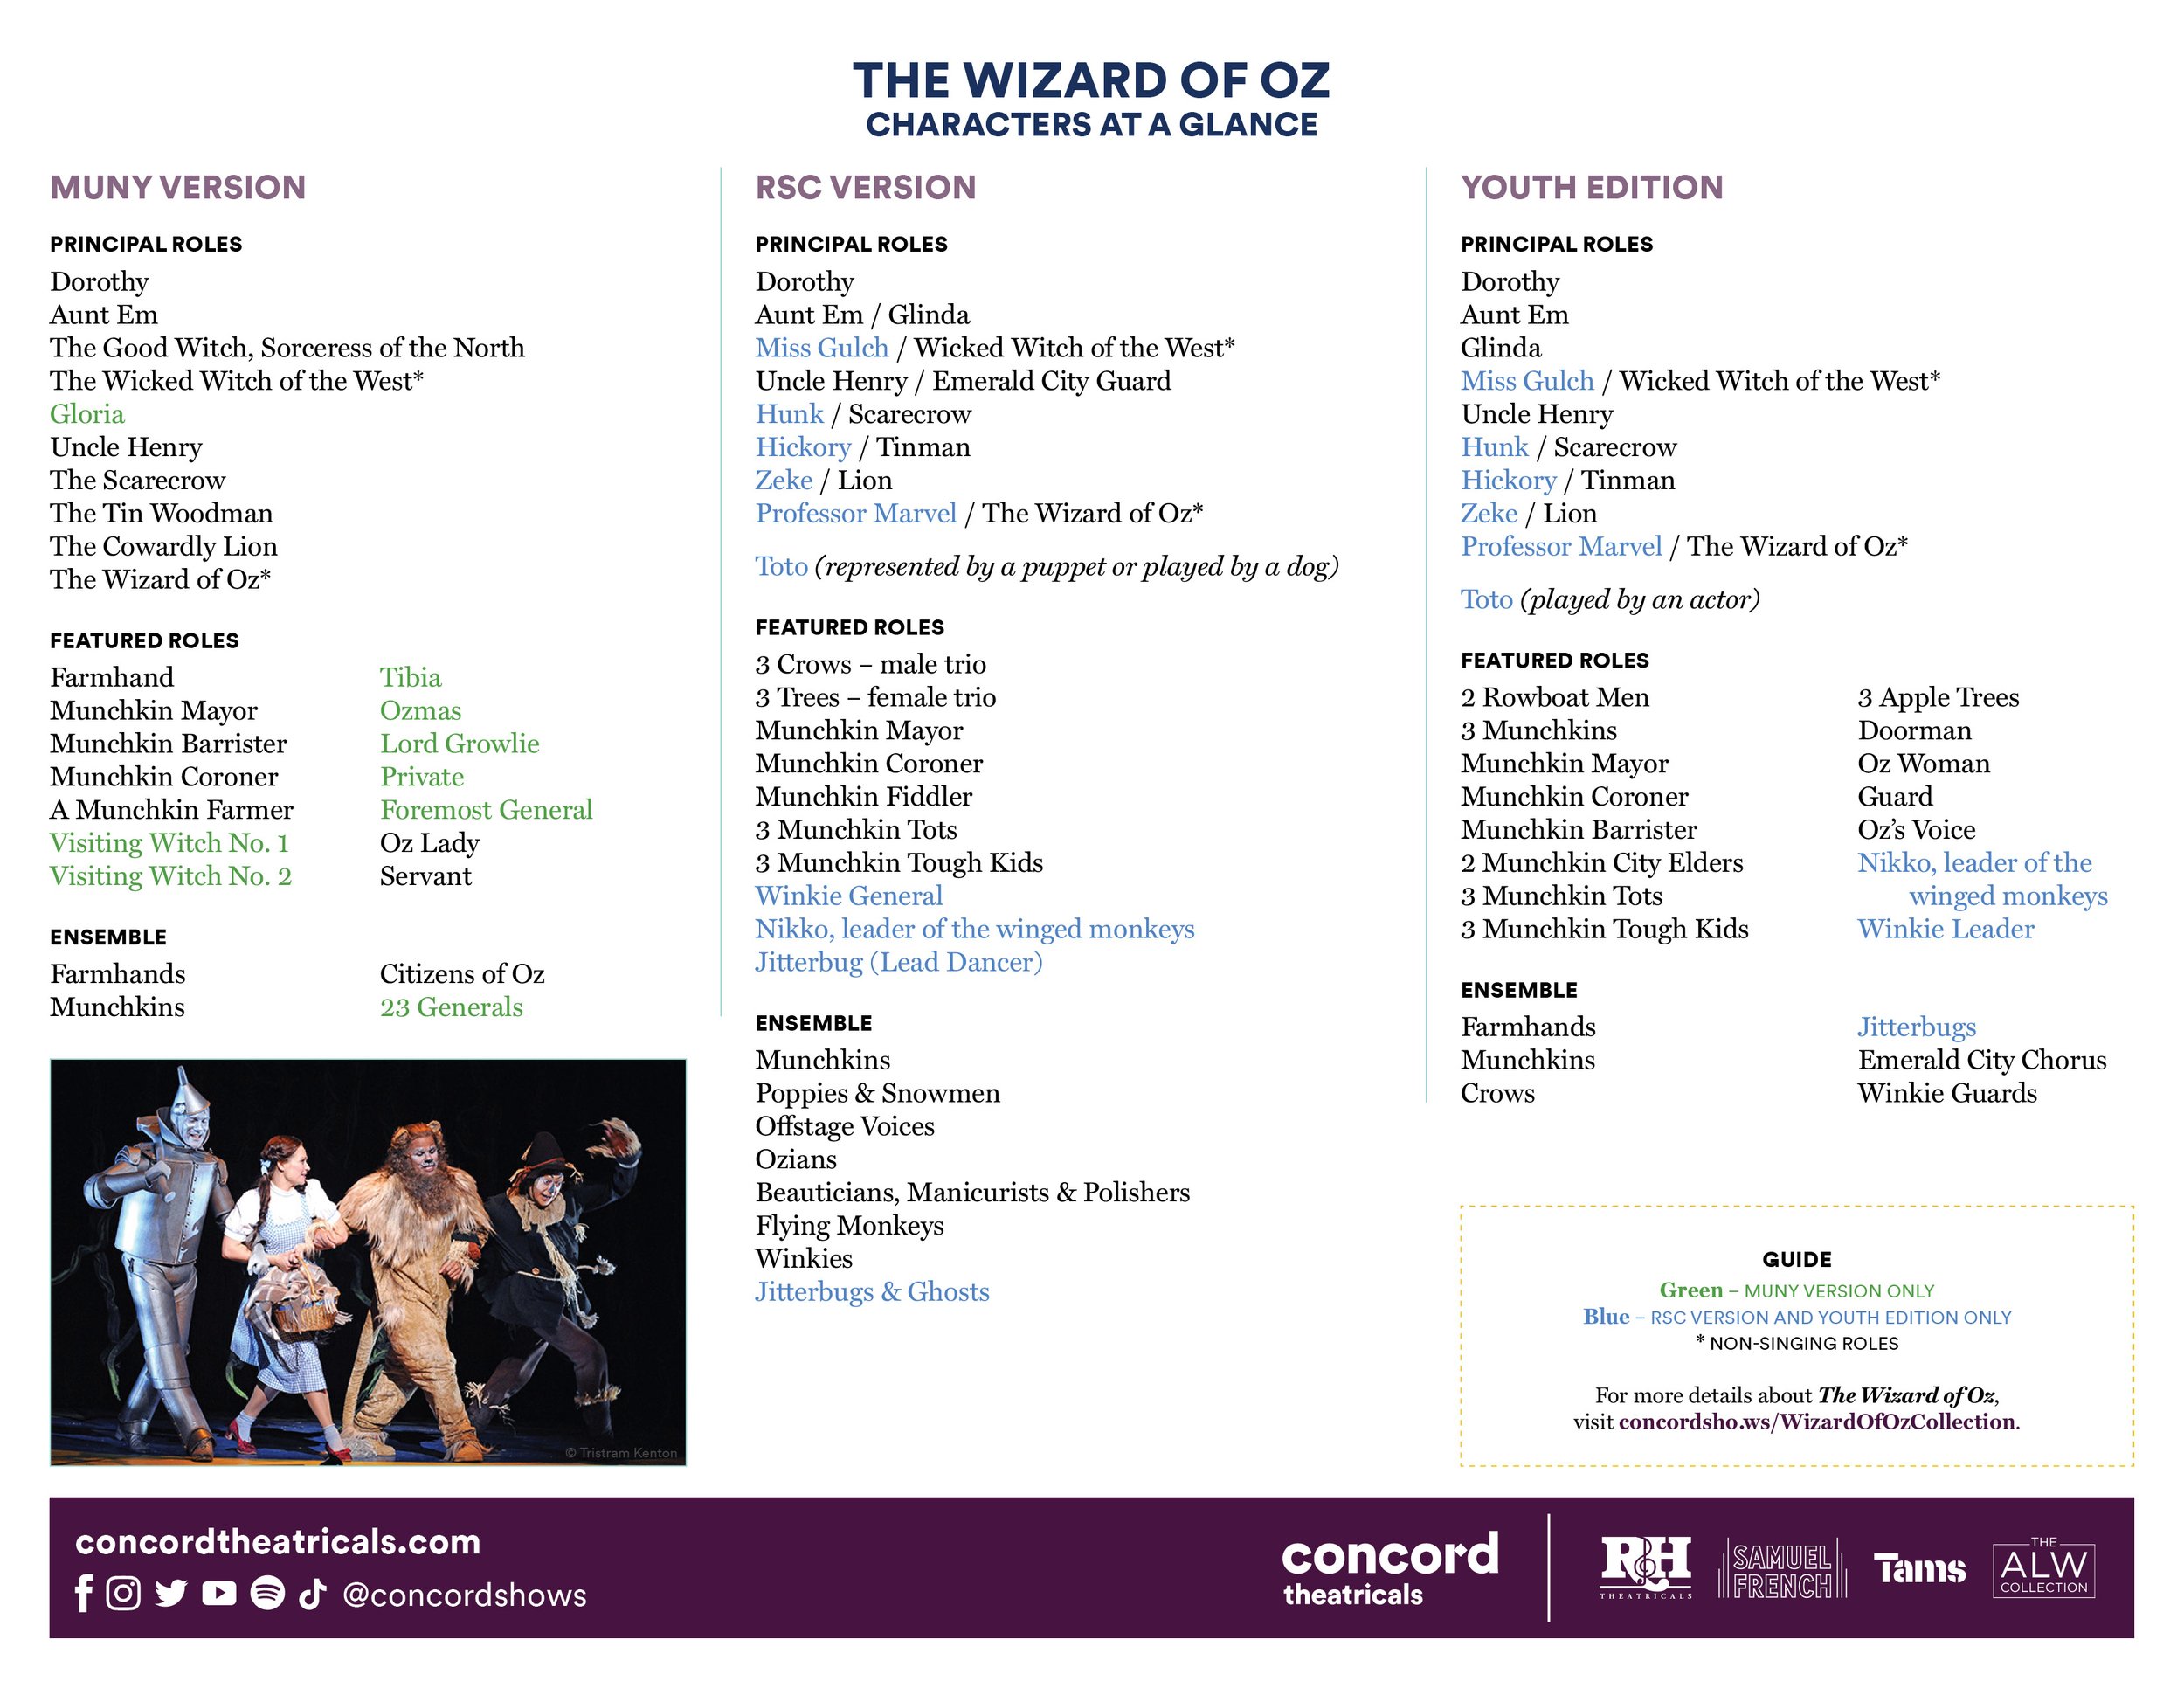 An image of the Characters Guide for The Wizard of Oz Collection.